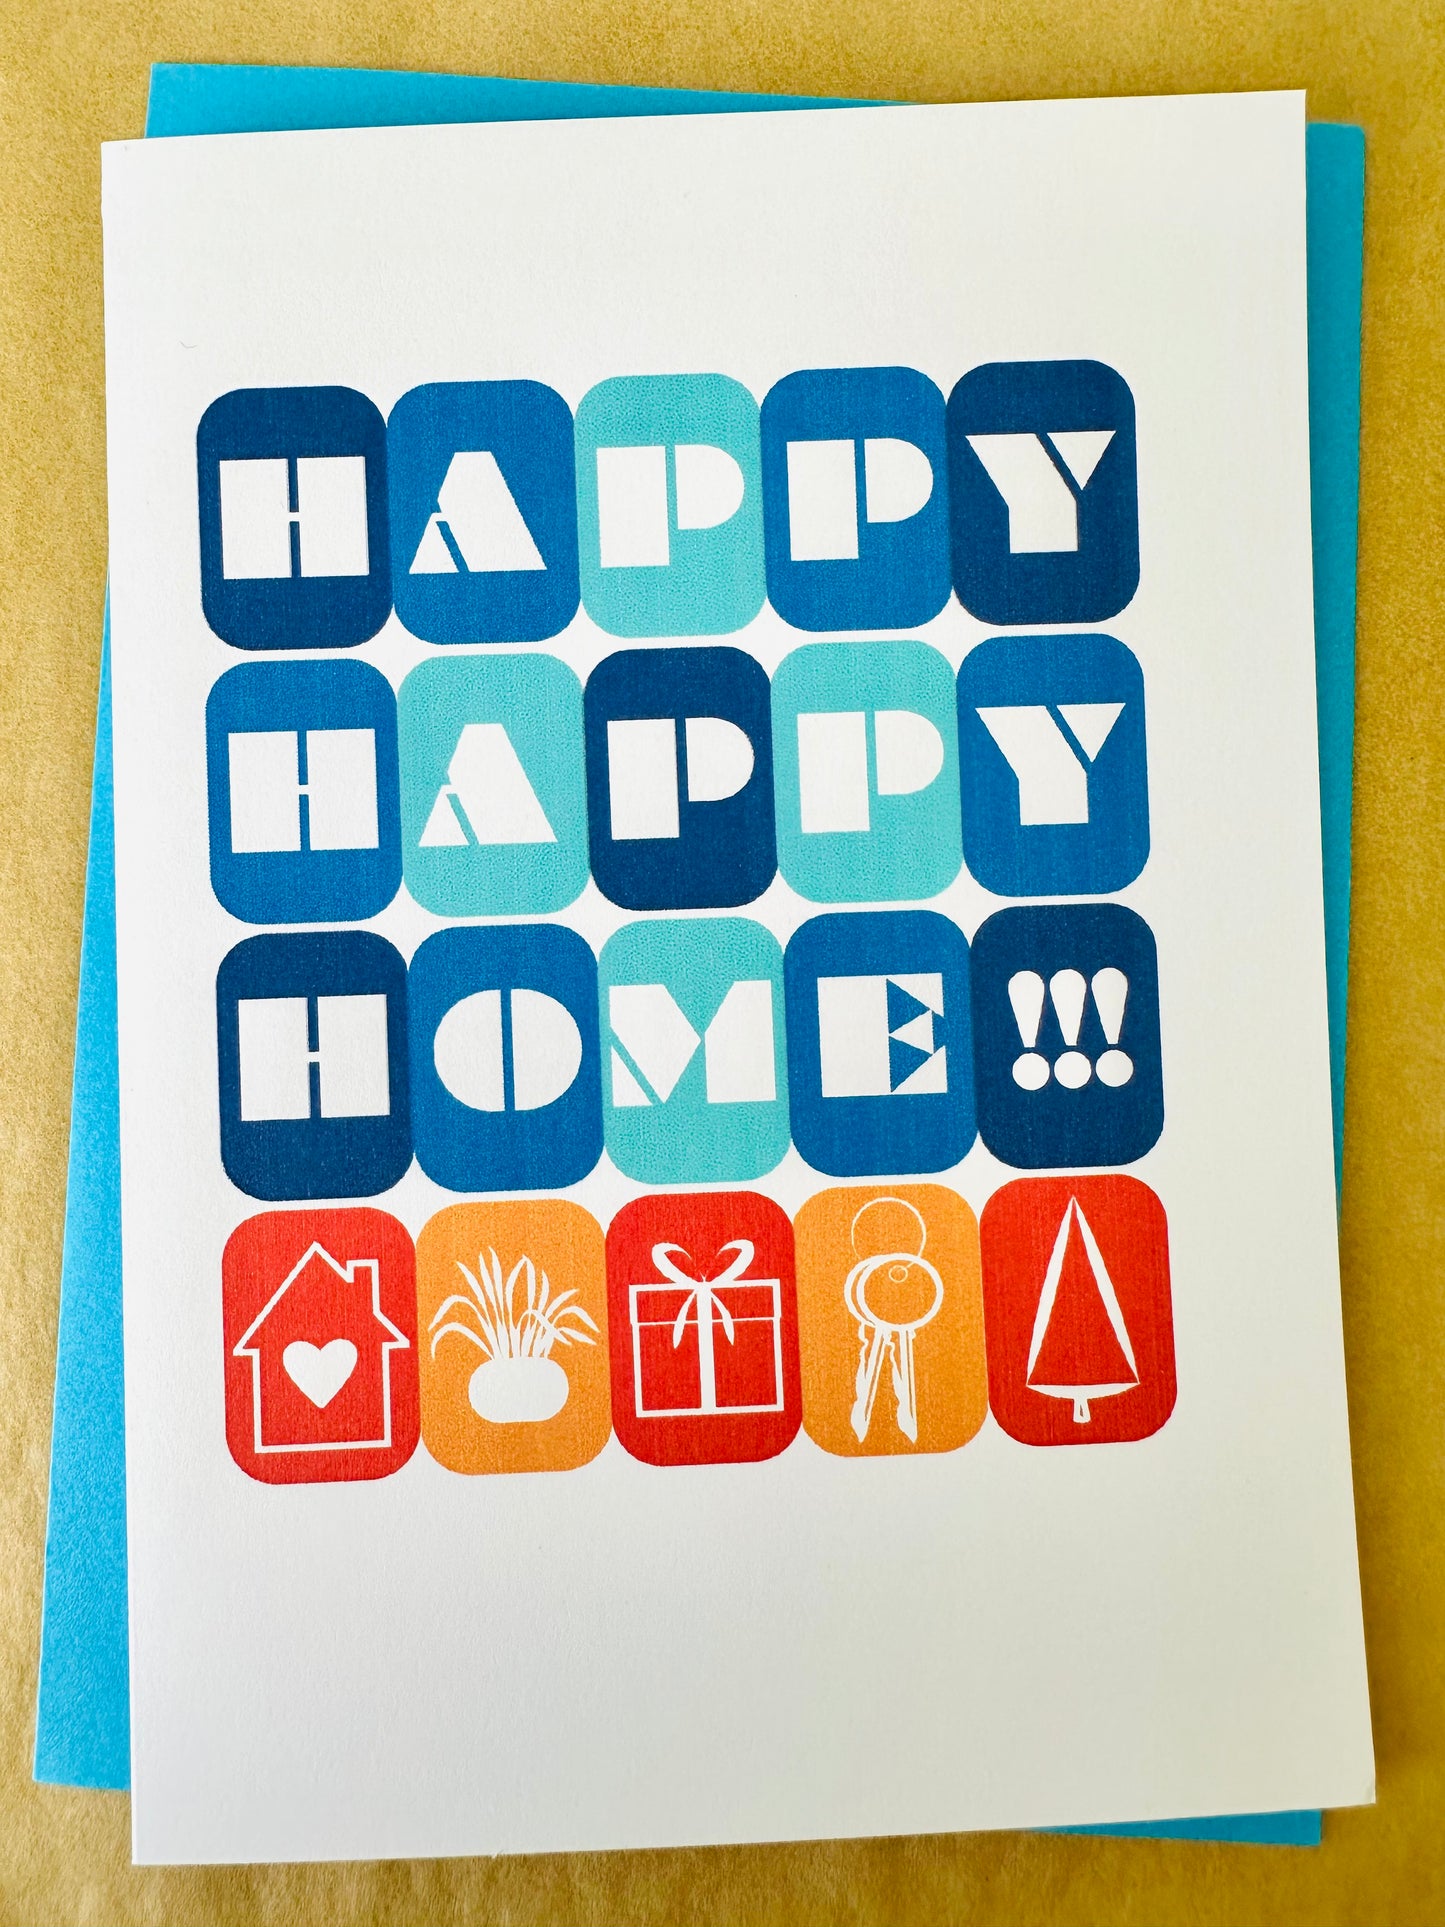 Happy Happy Home! & Happy New Home You! 5x7 Greeting card Celebrating the new Home